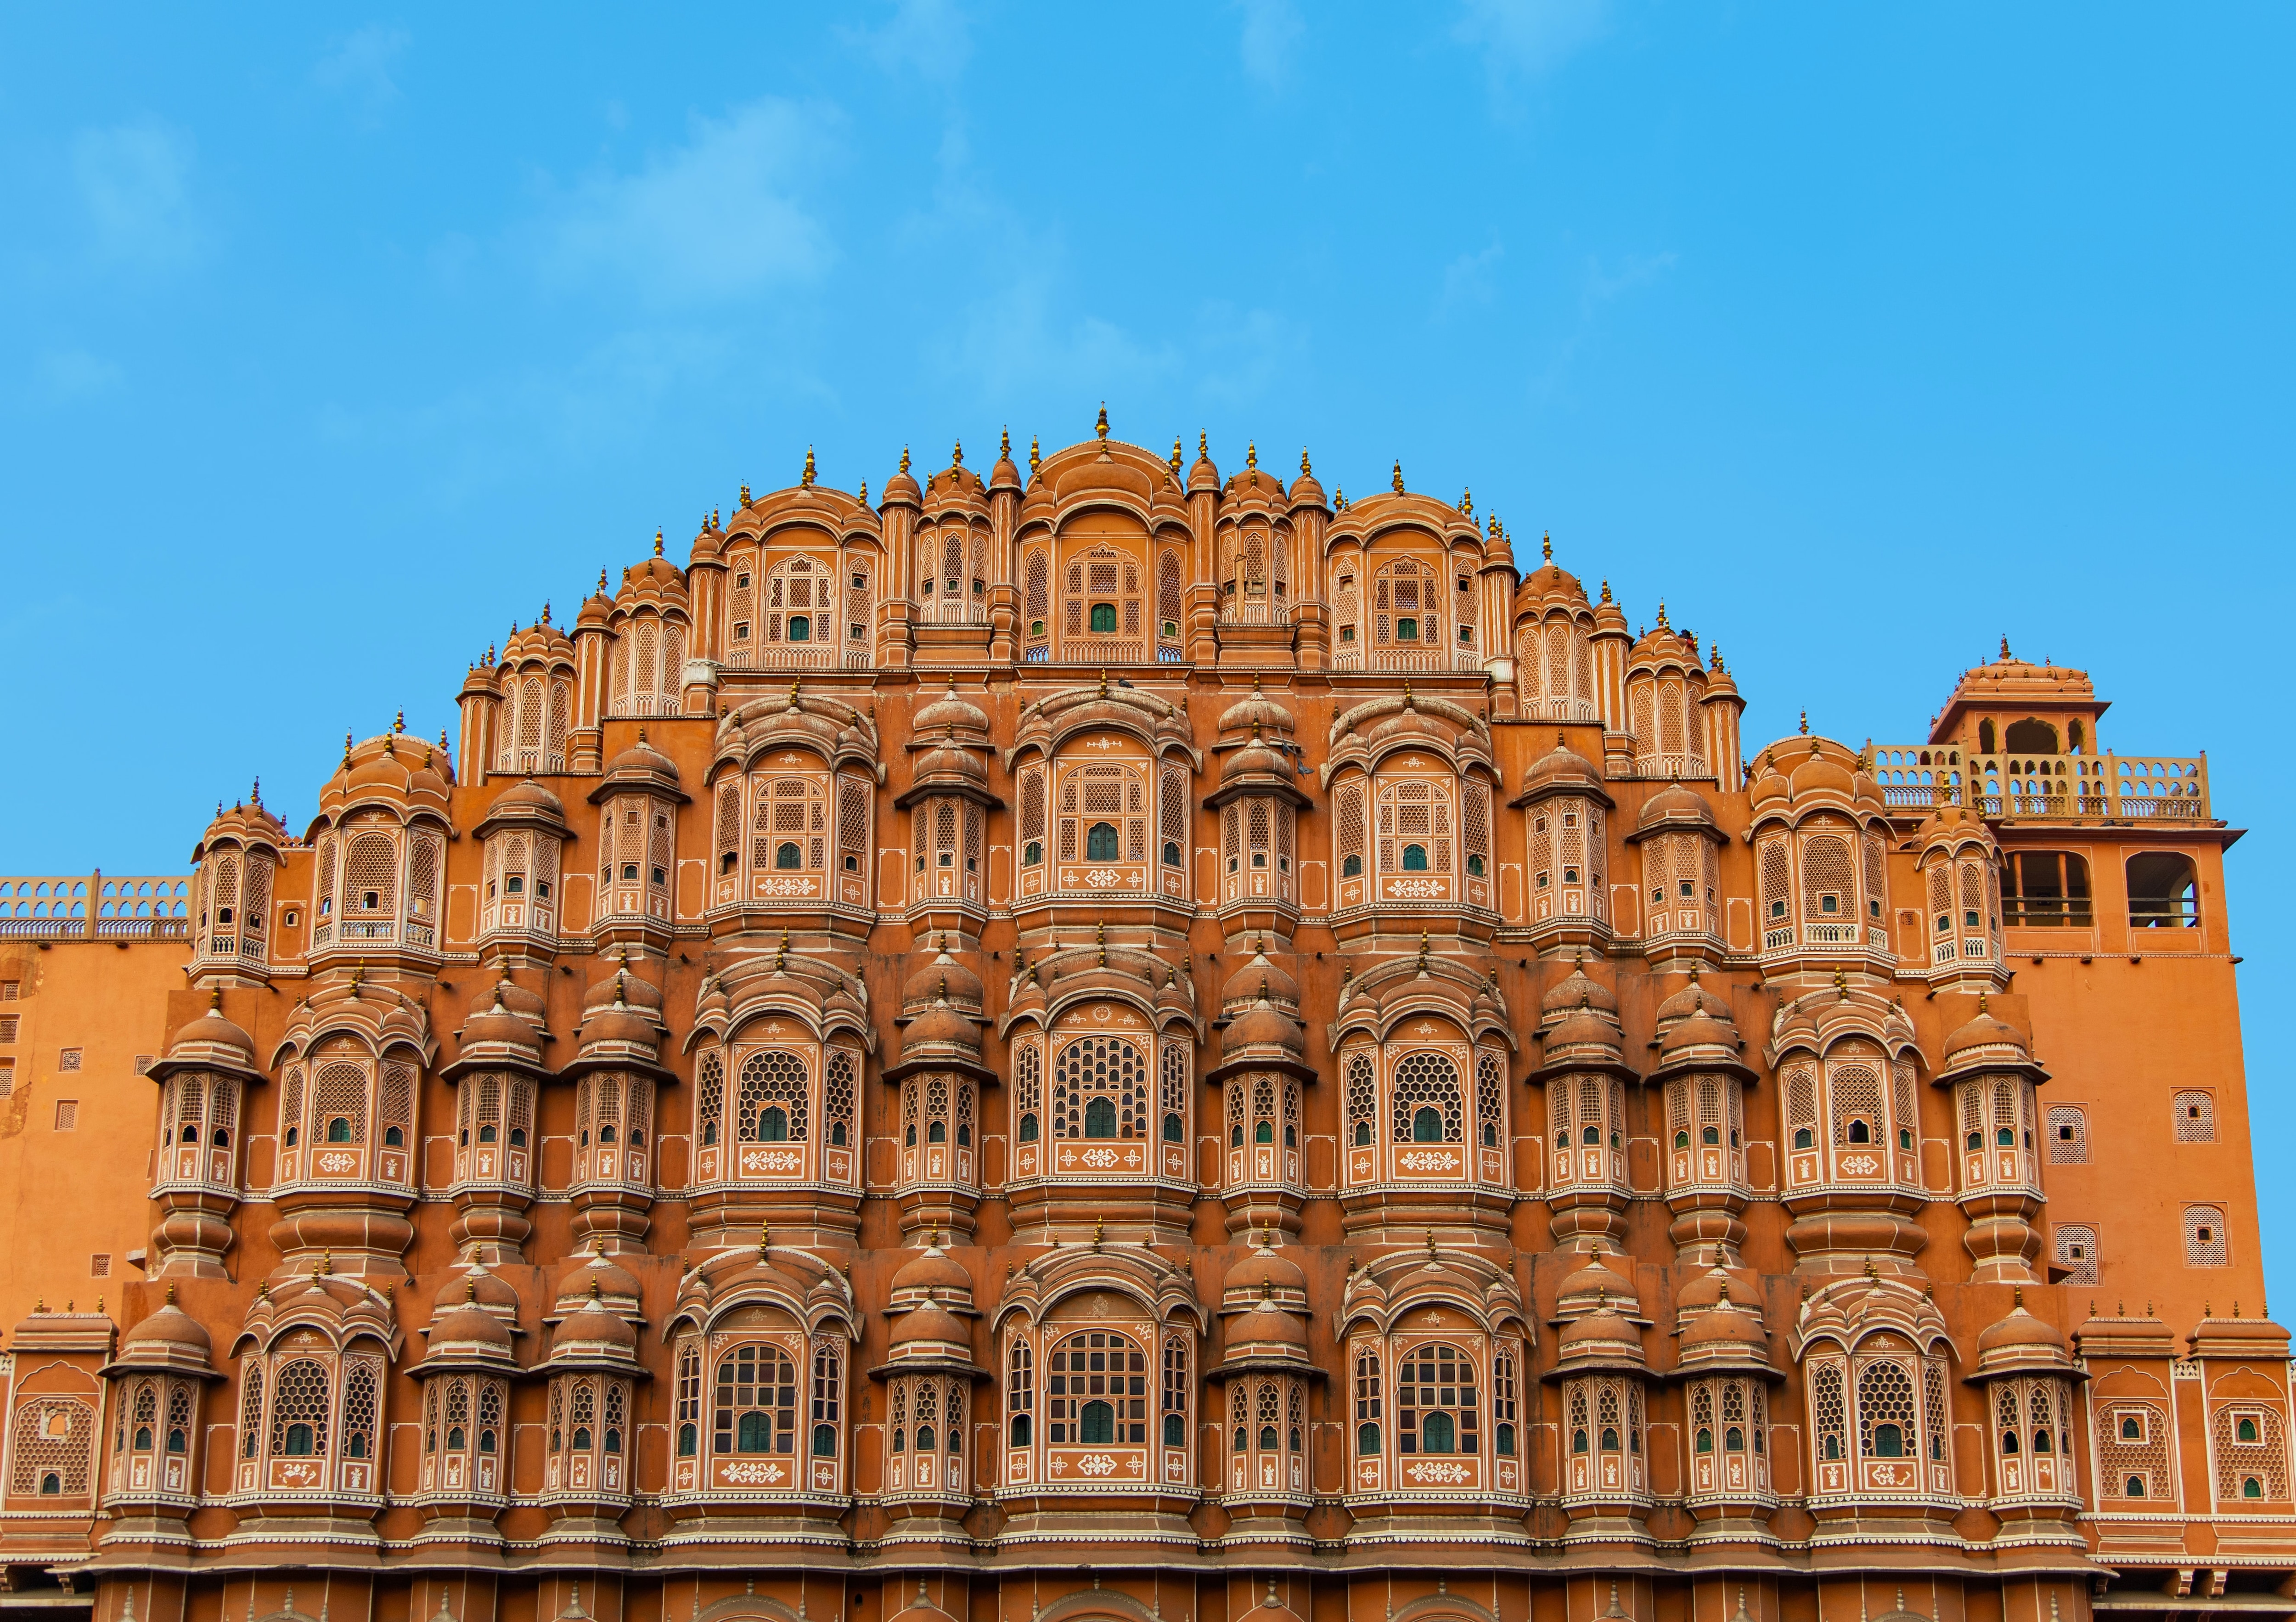 The majestic forts and palaces of Jaipur contribute to the city's glistening magnificence. (Unsplash)